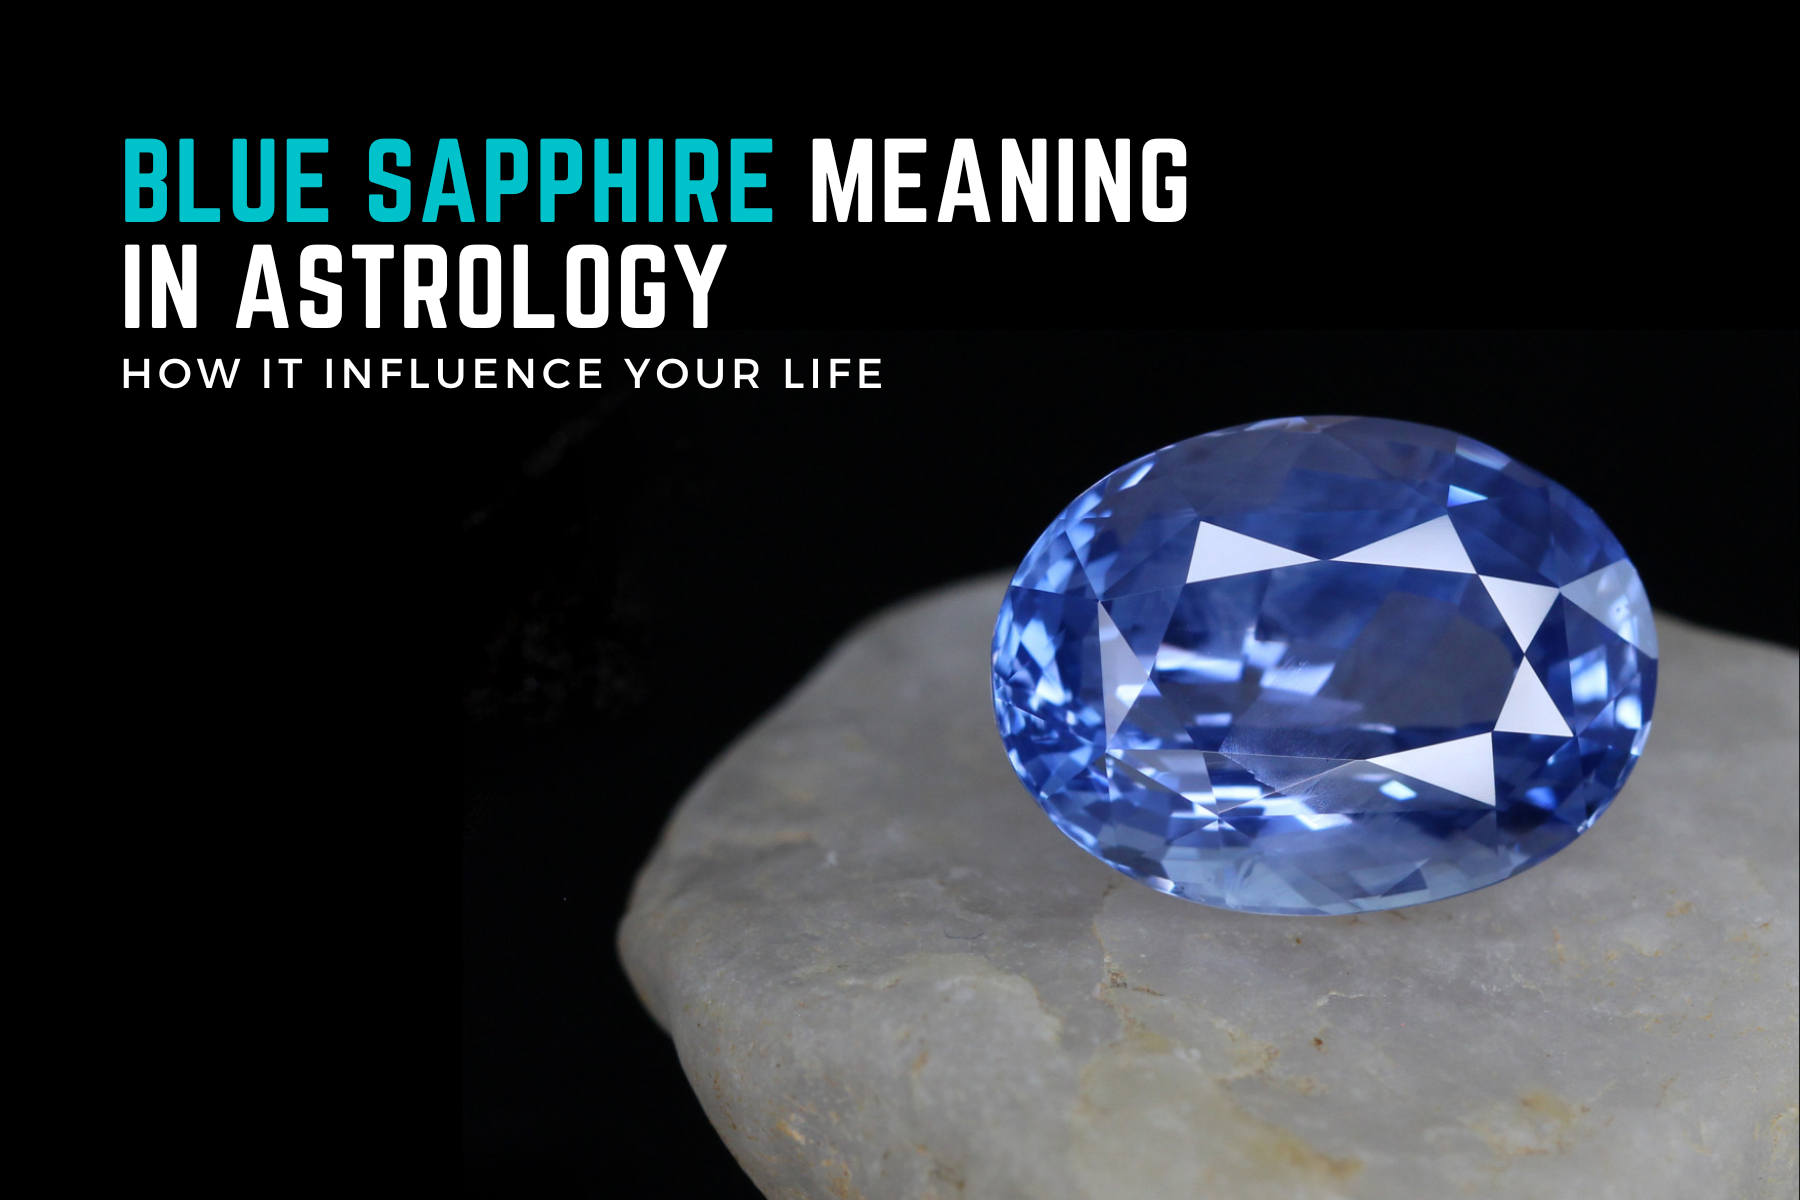 Blue Sapphire Meaning In Astrology - How It Can Influence Your Life